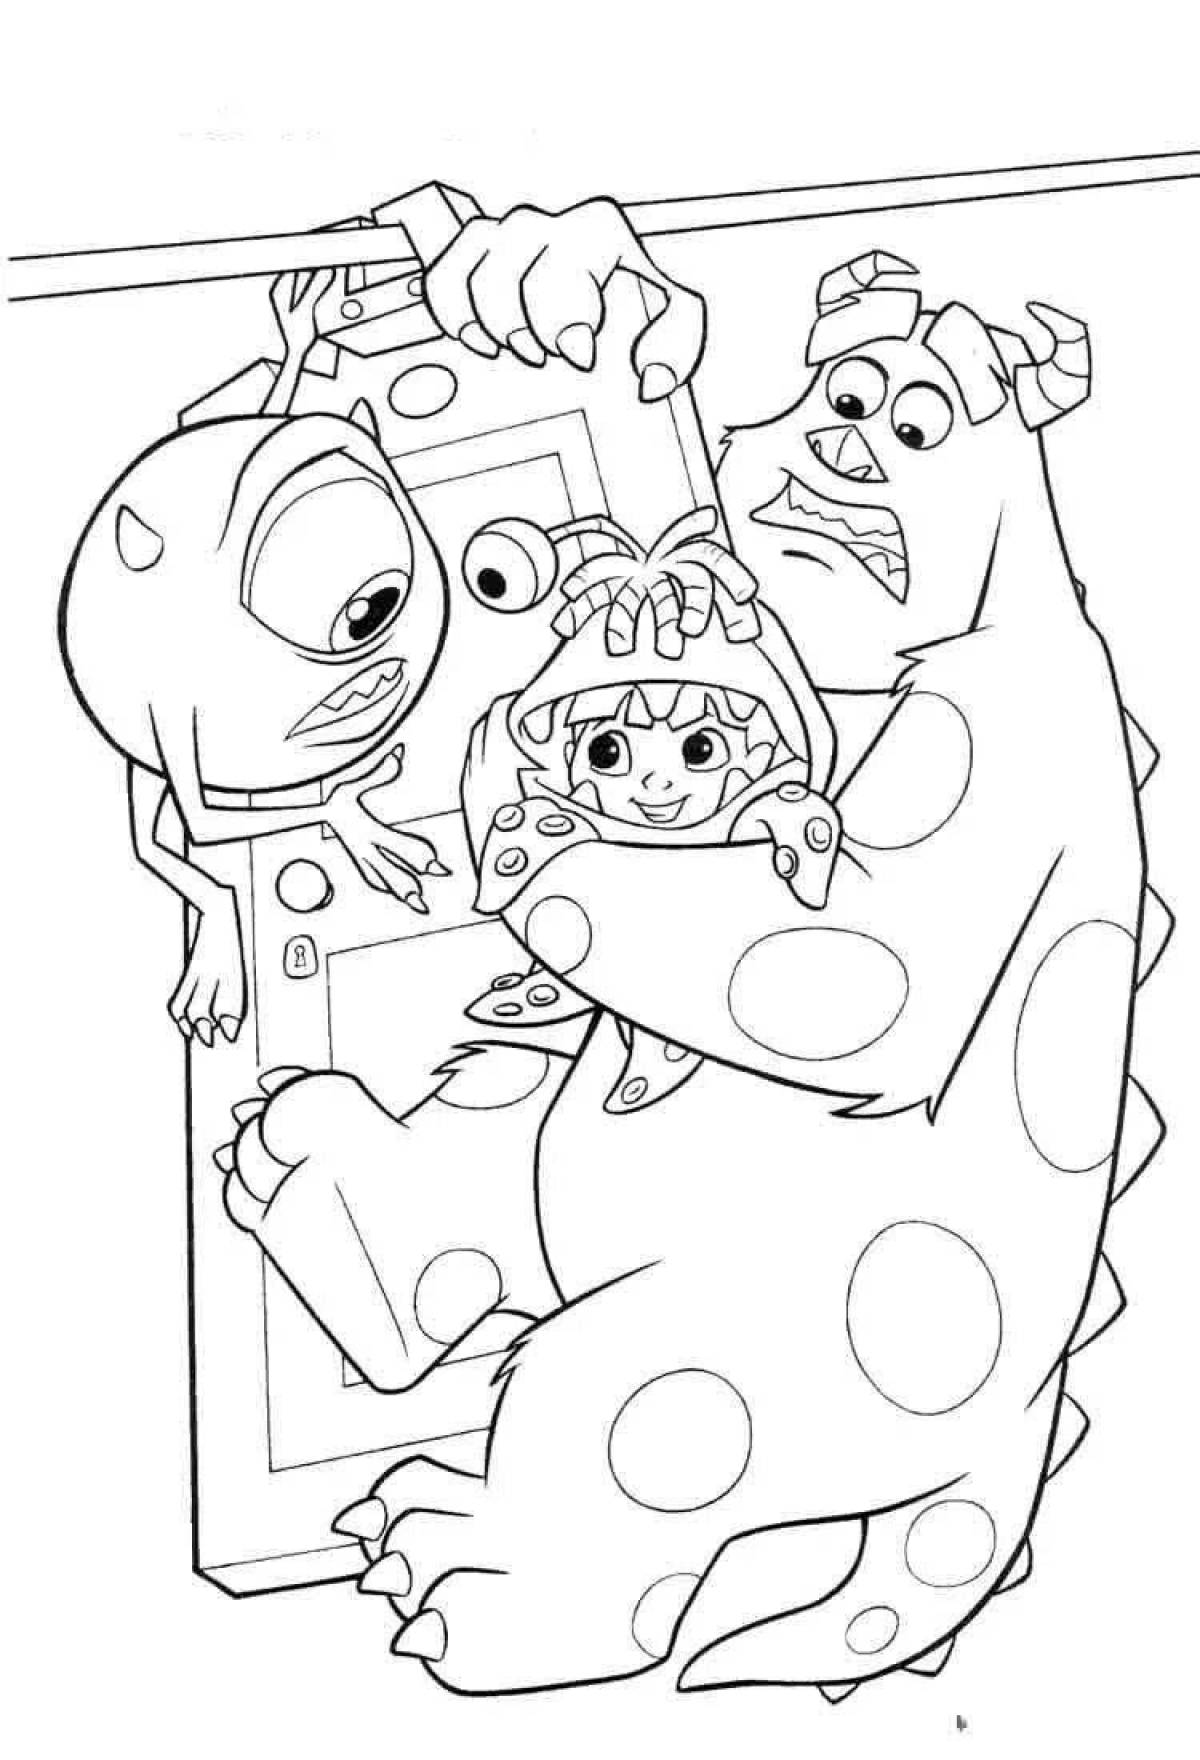 Coloring page of vibrant monsters corporation for kids